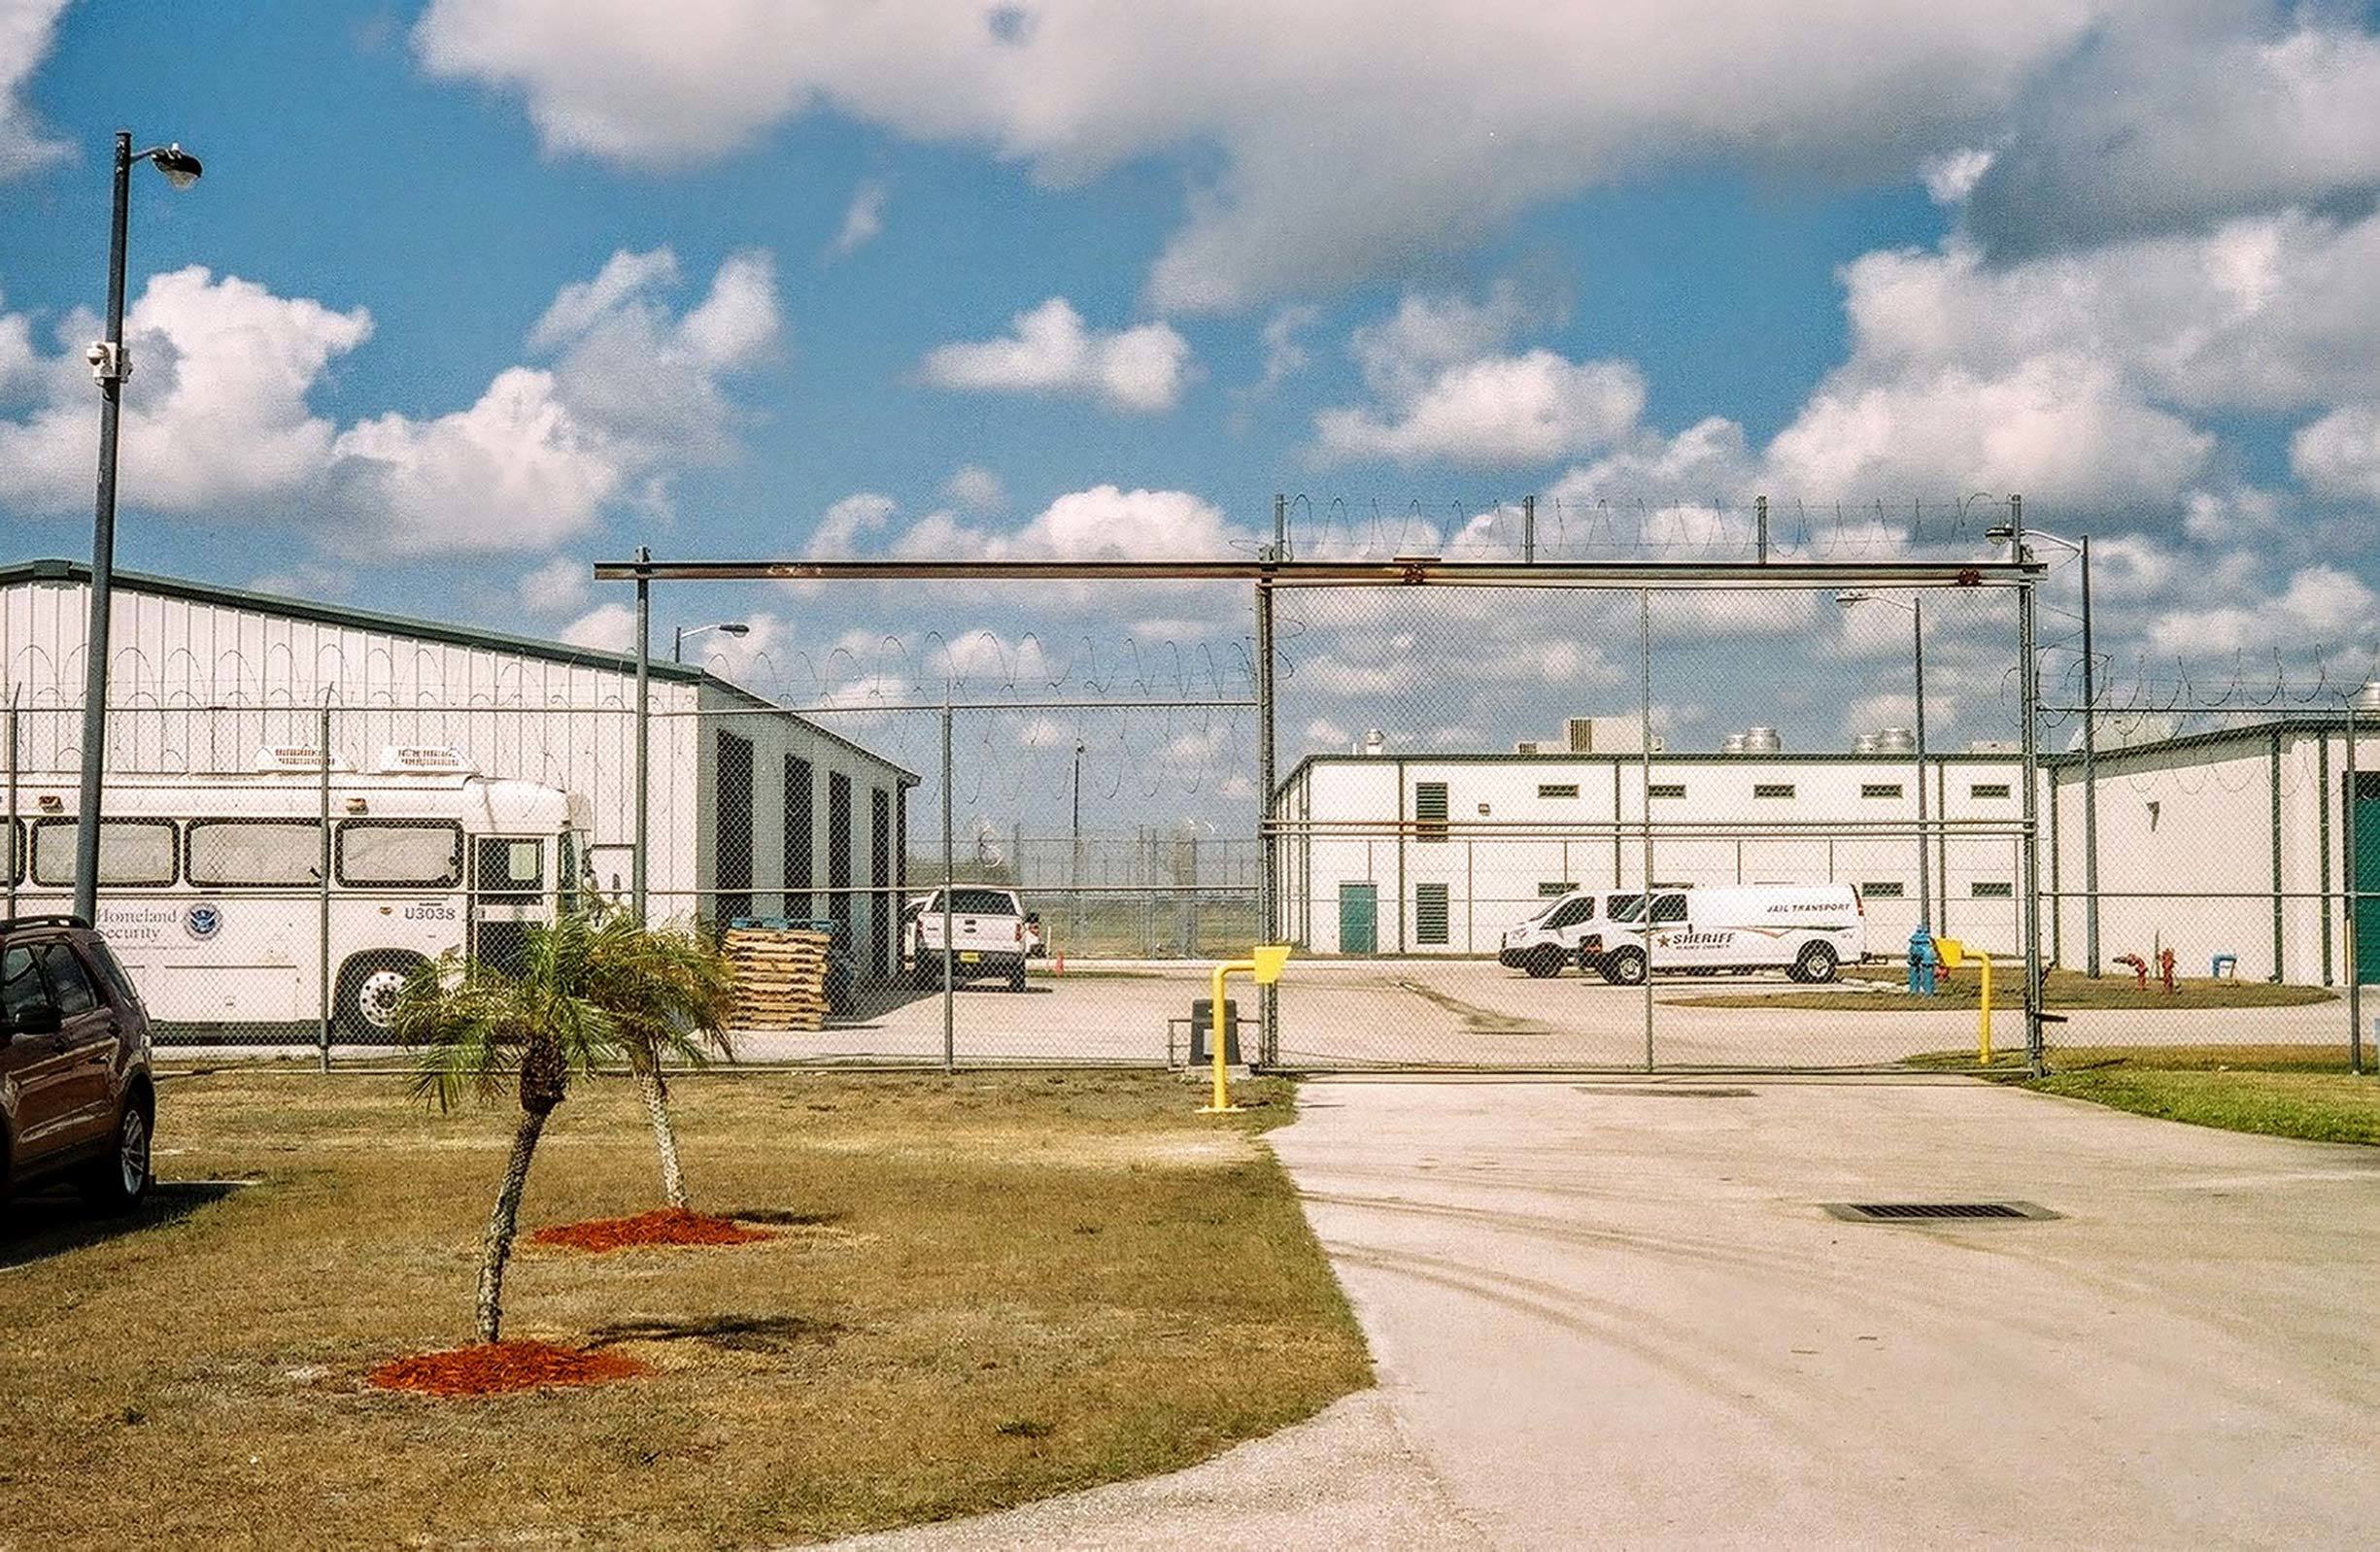 Jail parking area with tall fence and small palm trees